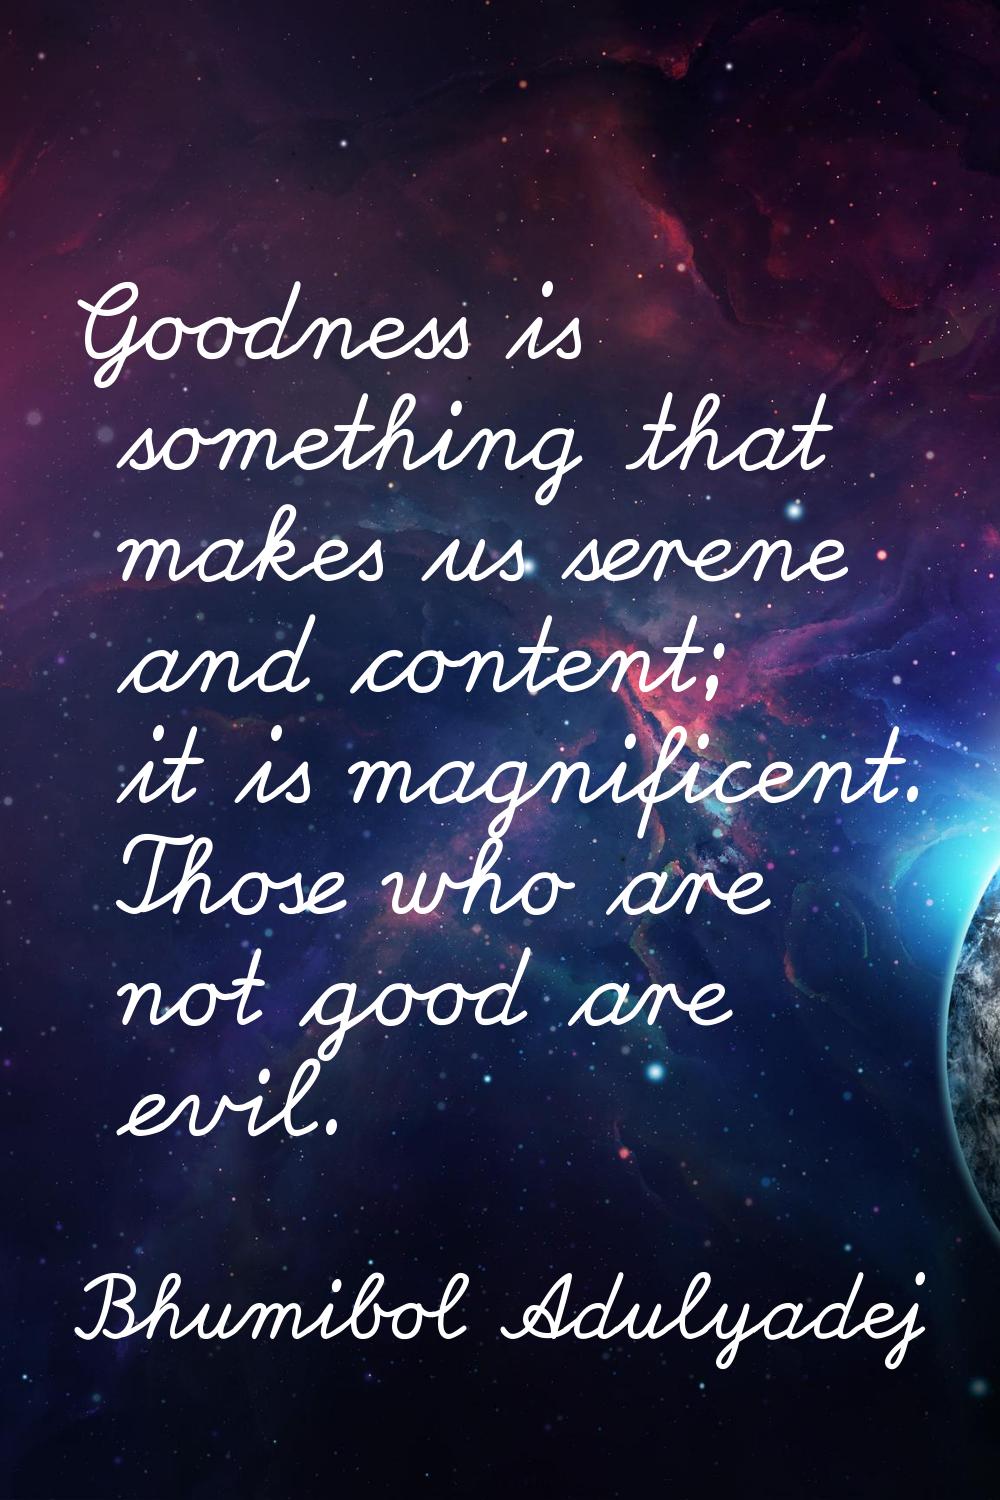 Goodness is something that makes us serene and content; it is magnificent. Those who are not good a